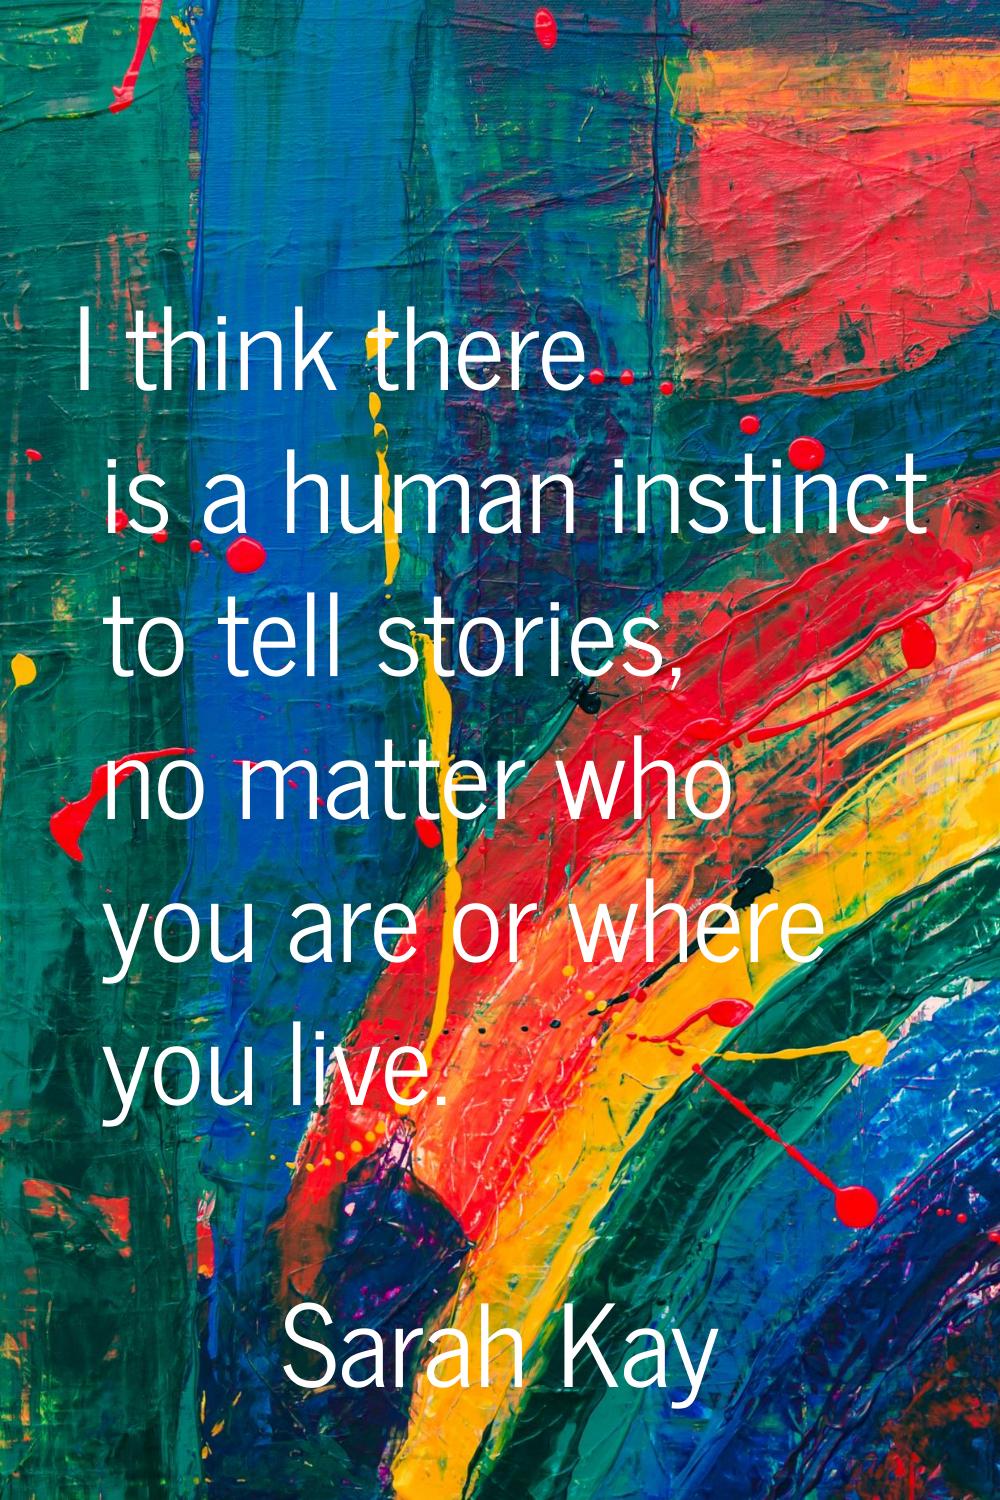 I think there is a human instinct to tell stories, no matter who you are or where you live.